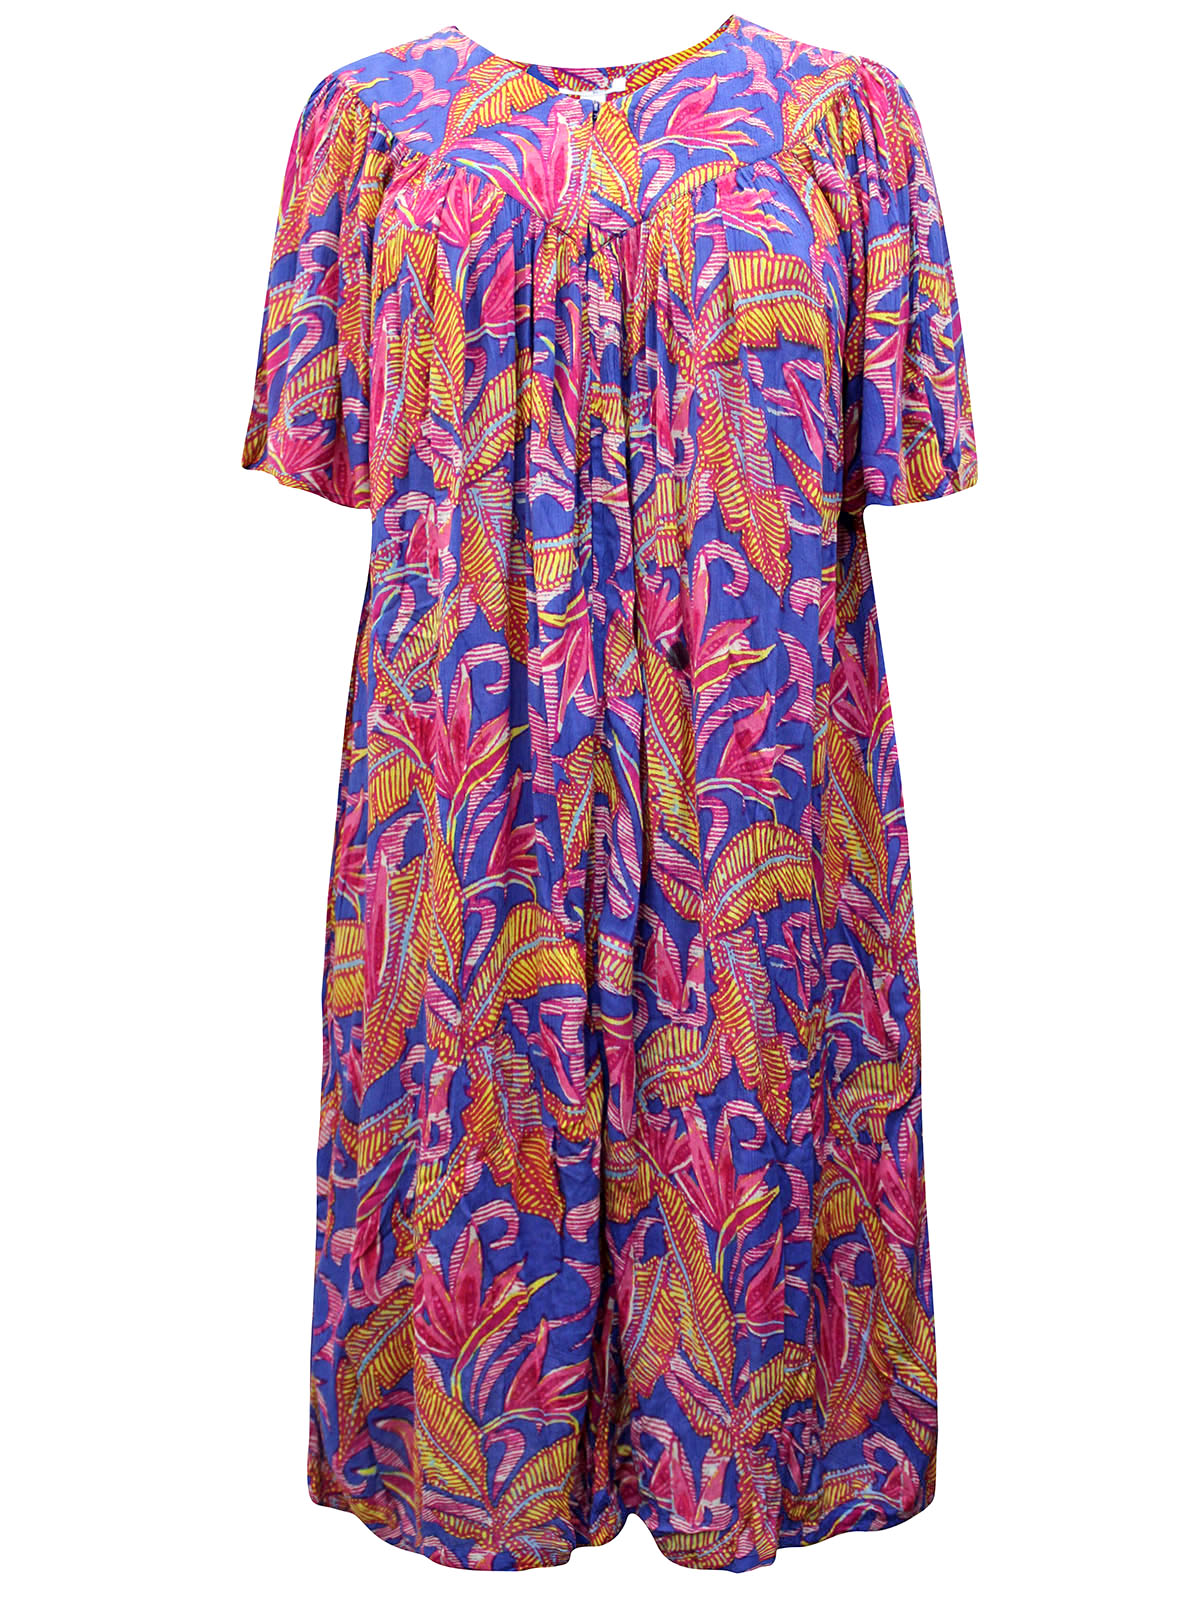 Go Softly - - Go Softly PINK Leaf Print Crinkled Zip-Front Patio Dress ...